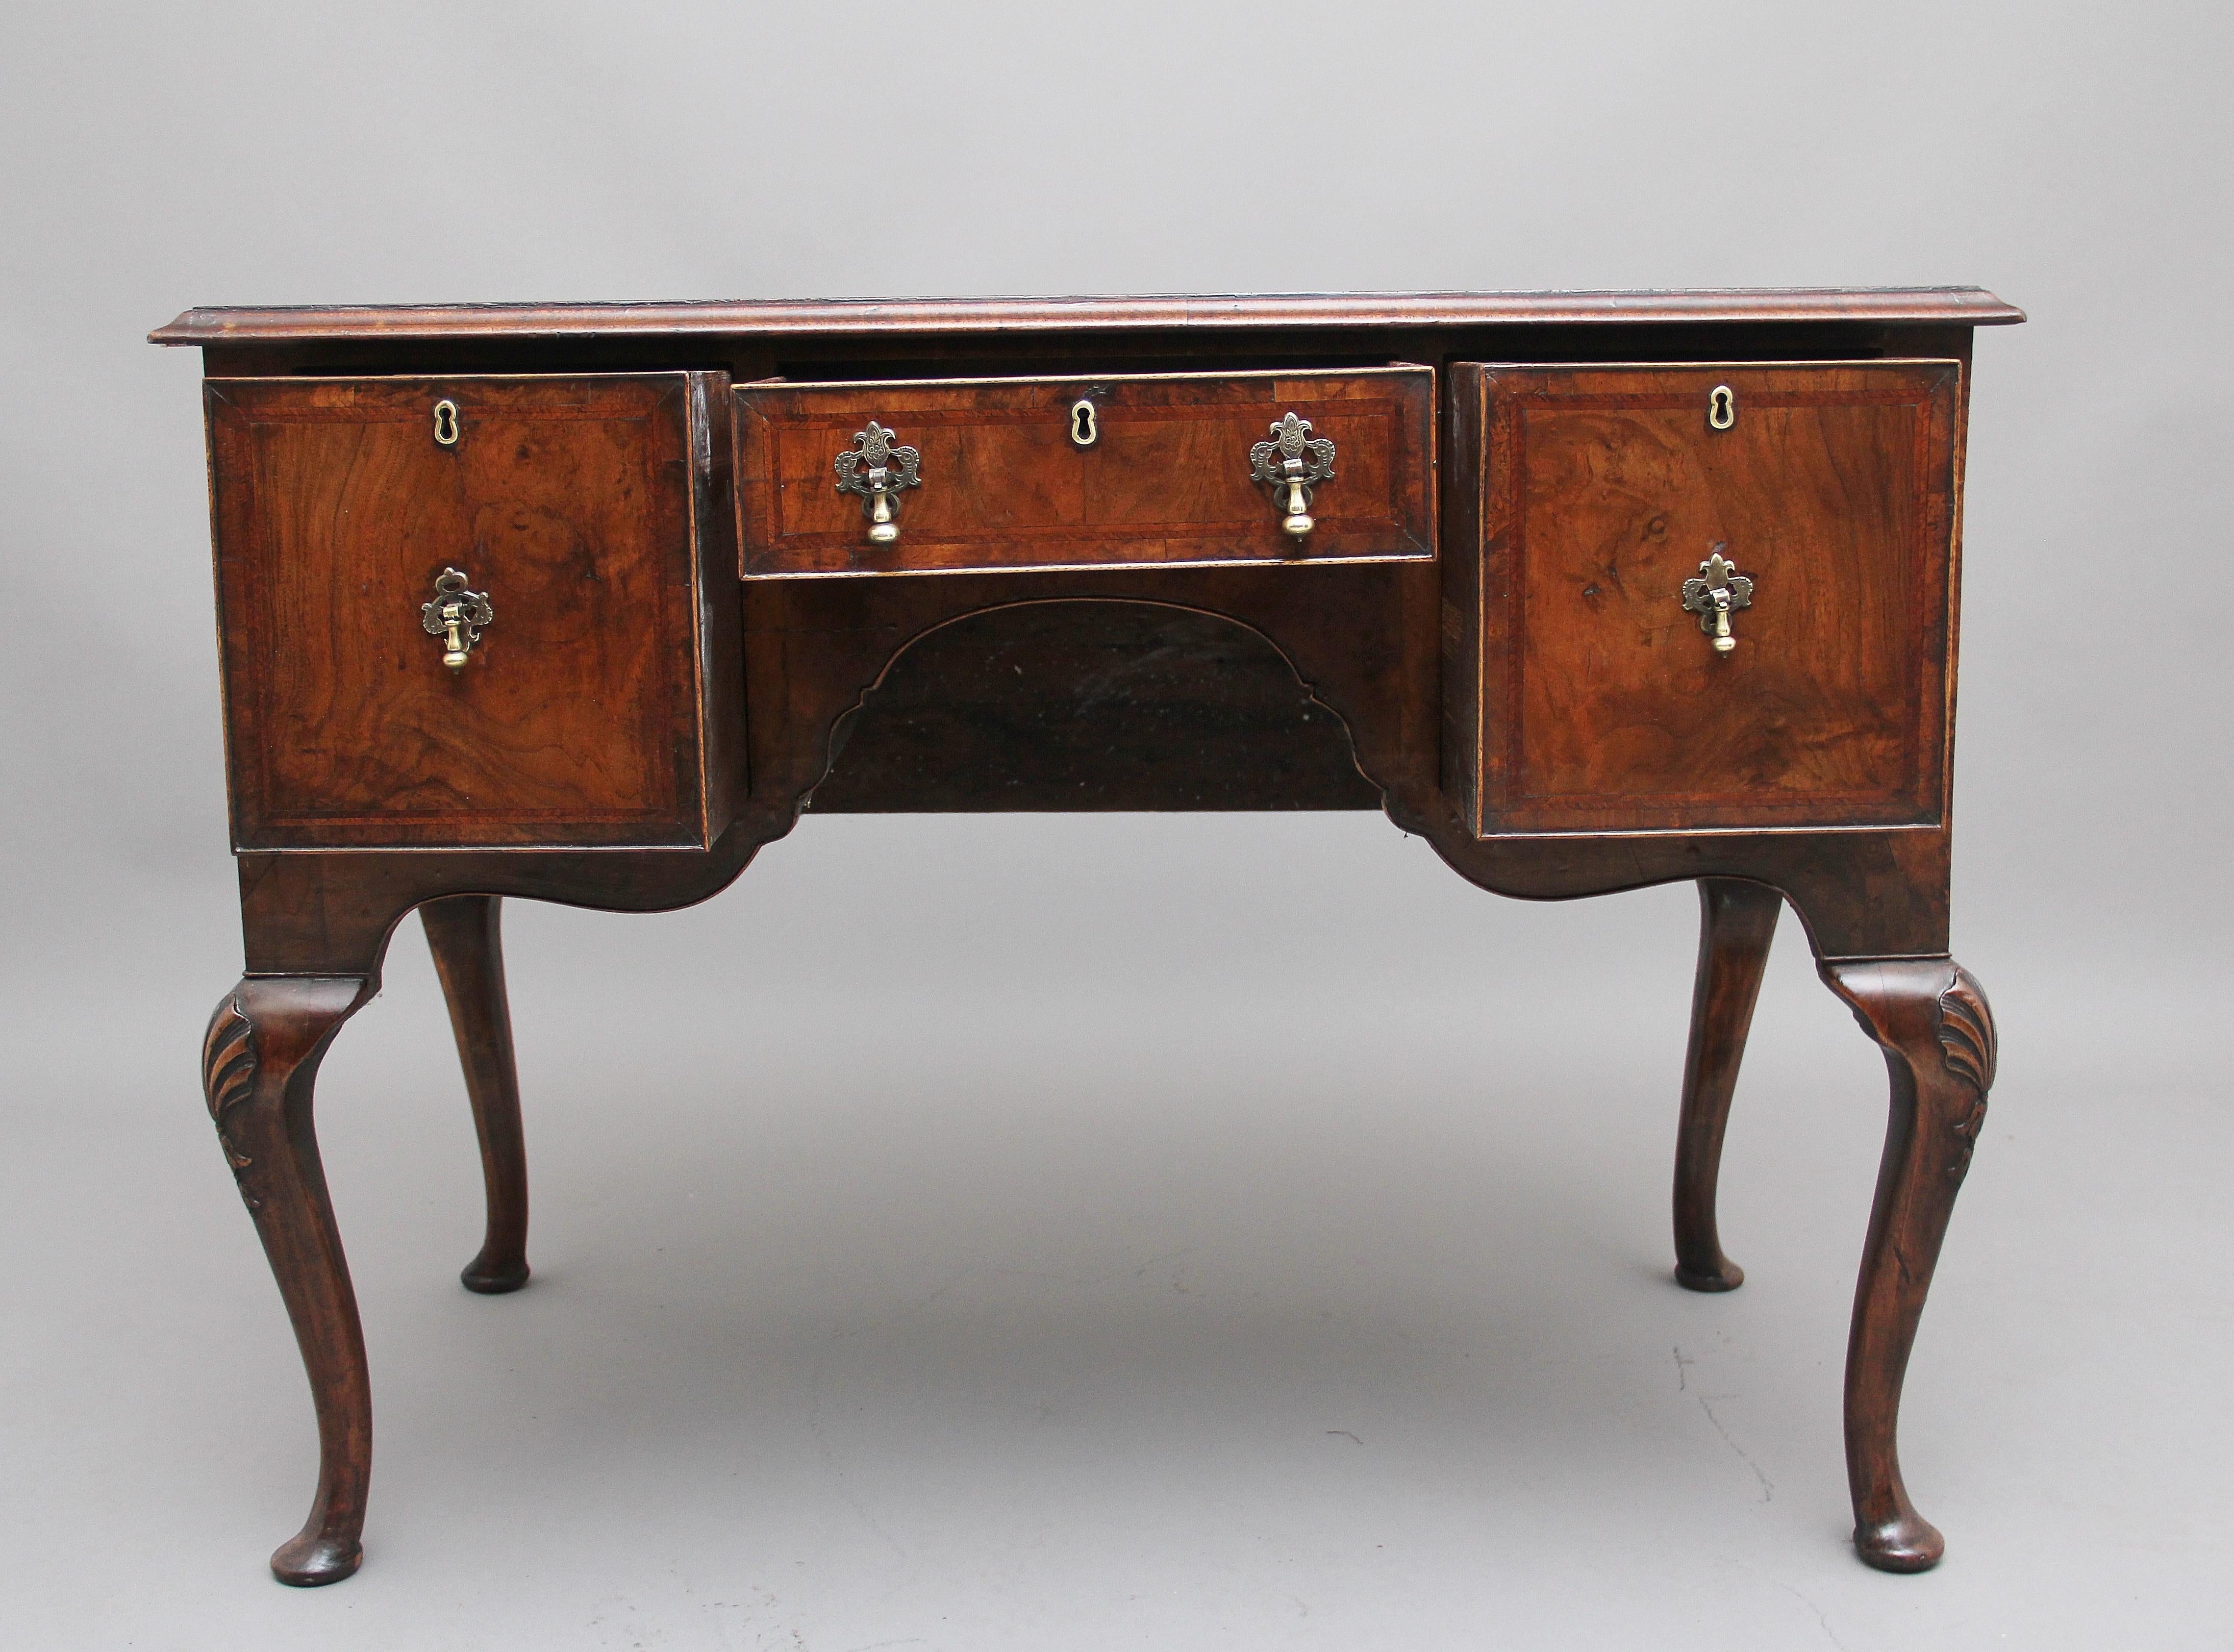 18th century walnut and feather banded side table / lowboy, the moulded edge top crossbanded and decorated with feather banding above a selection of three oak lined drawers with original brass handles, the drawer fronts also having feather banding,